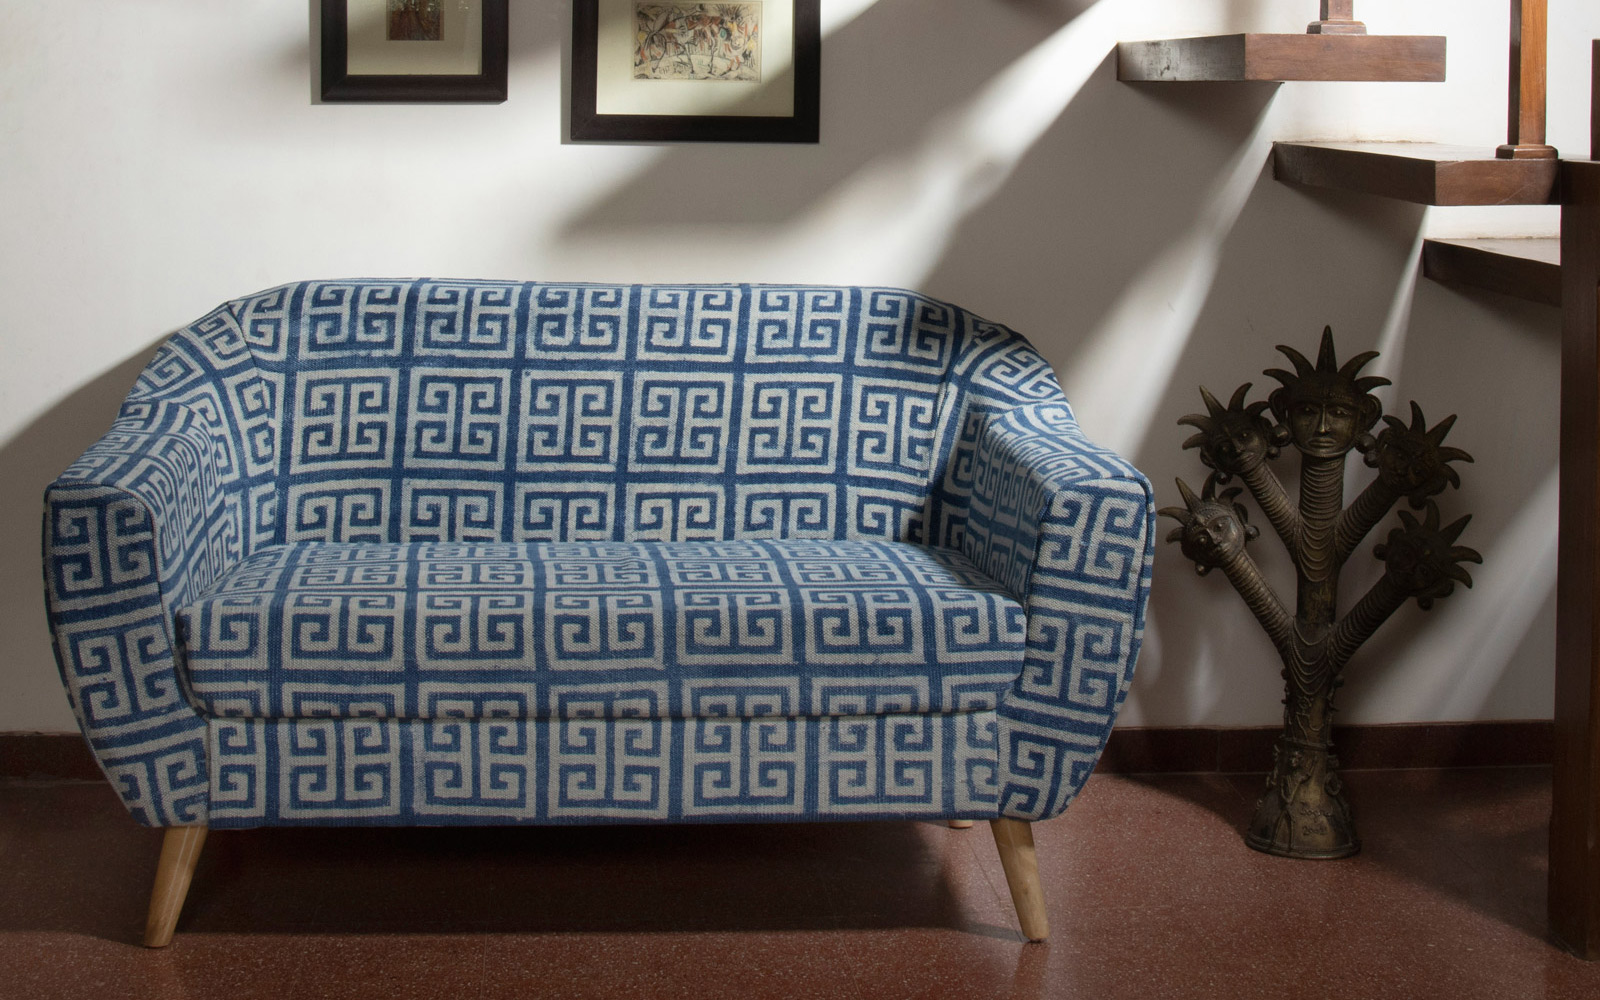 First Look: Sihasn furnishes the seats in your house in the best vintage textiles from around the country - Home D&eacute;cor Ideas - Beautiful Homes